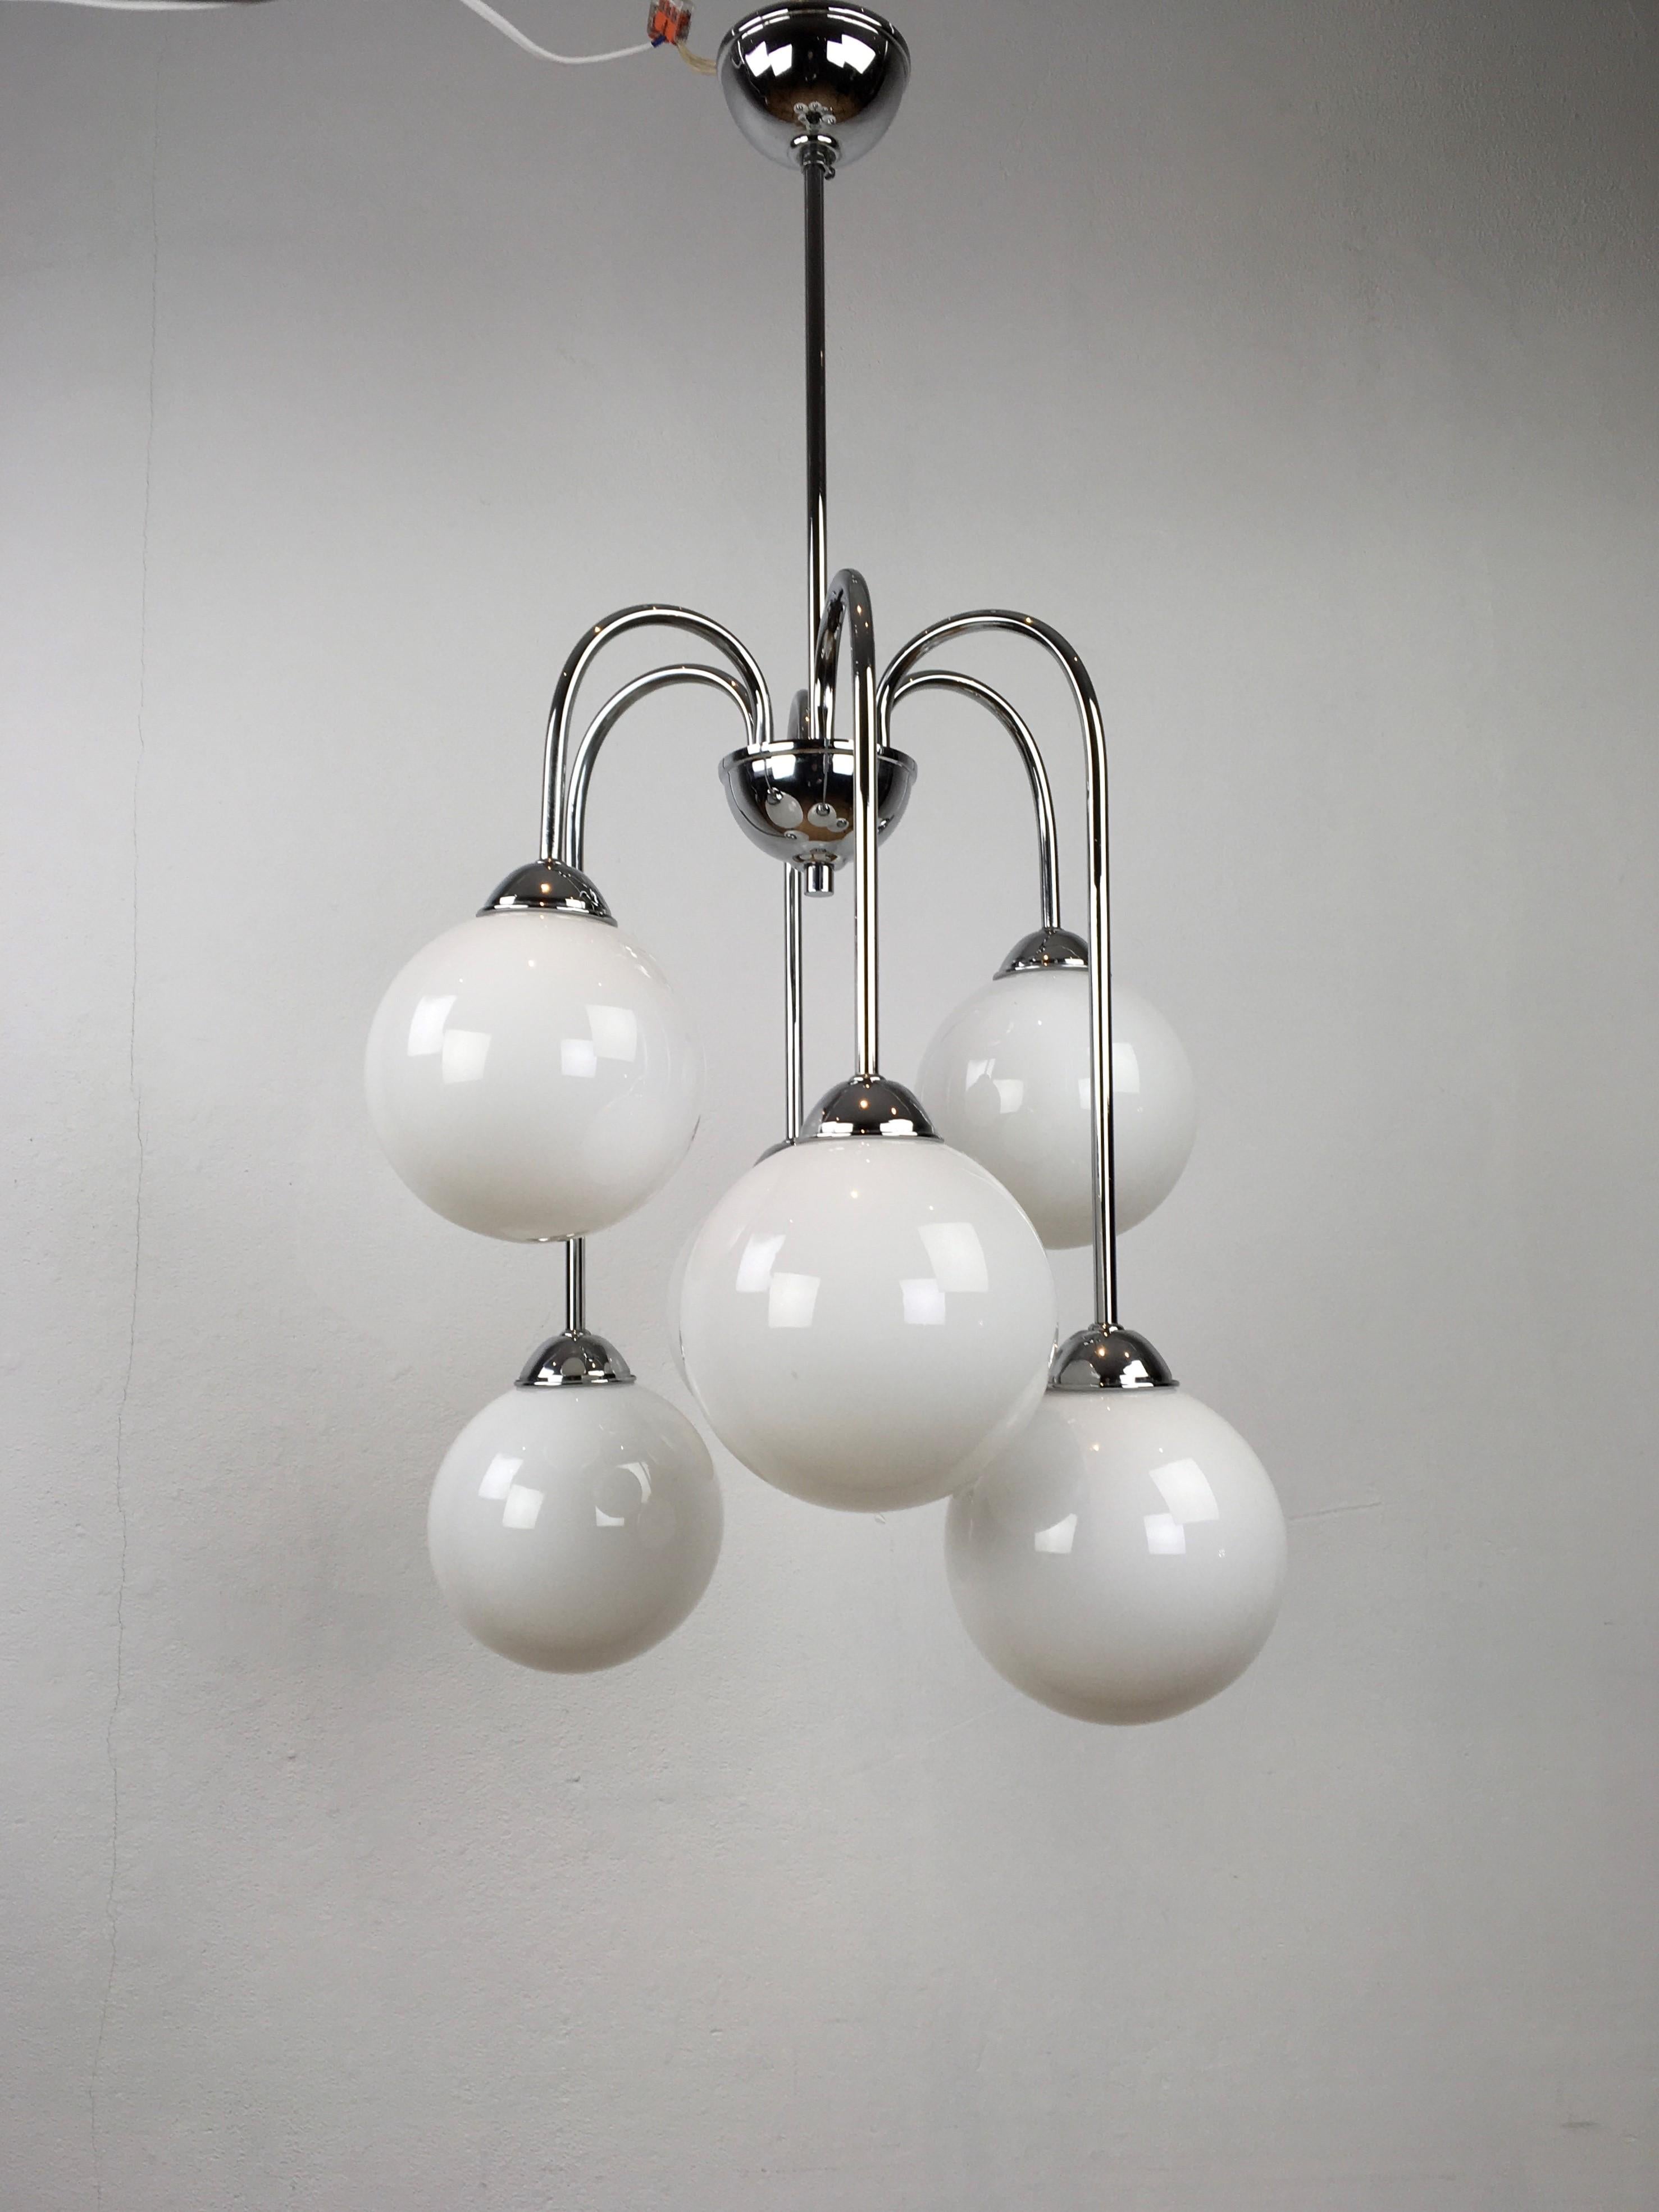 Modern chandelier with 6 lightpoints. 
Chromed metal frame with 6 opaline glass globes.
This opaline glass chandelier - milk glass chandelier will suit your interior well.